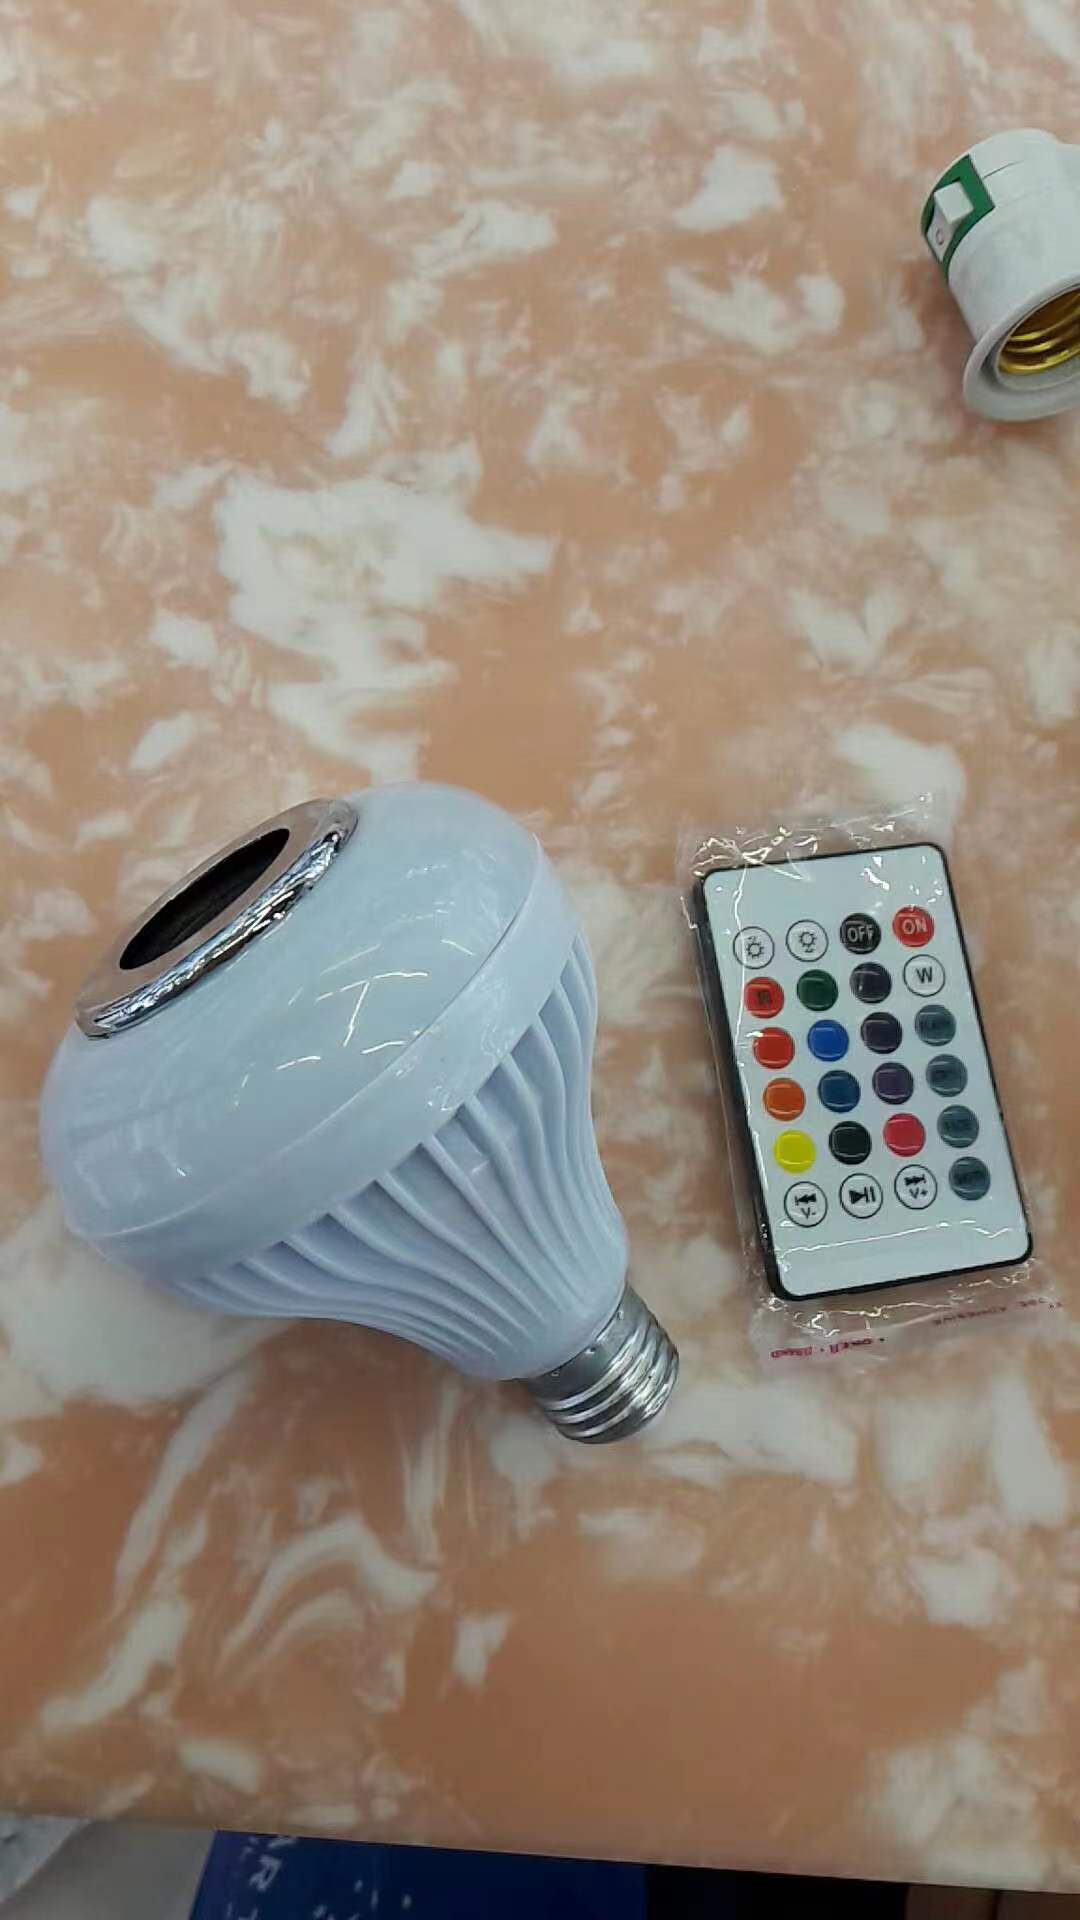 LED indoor creative Bluetooth connected music atmosphere light bulb